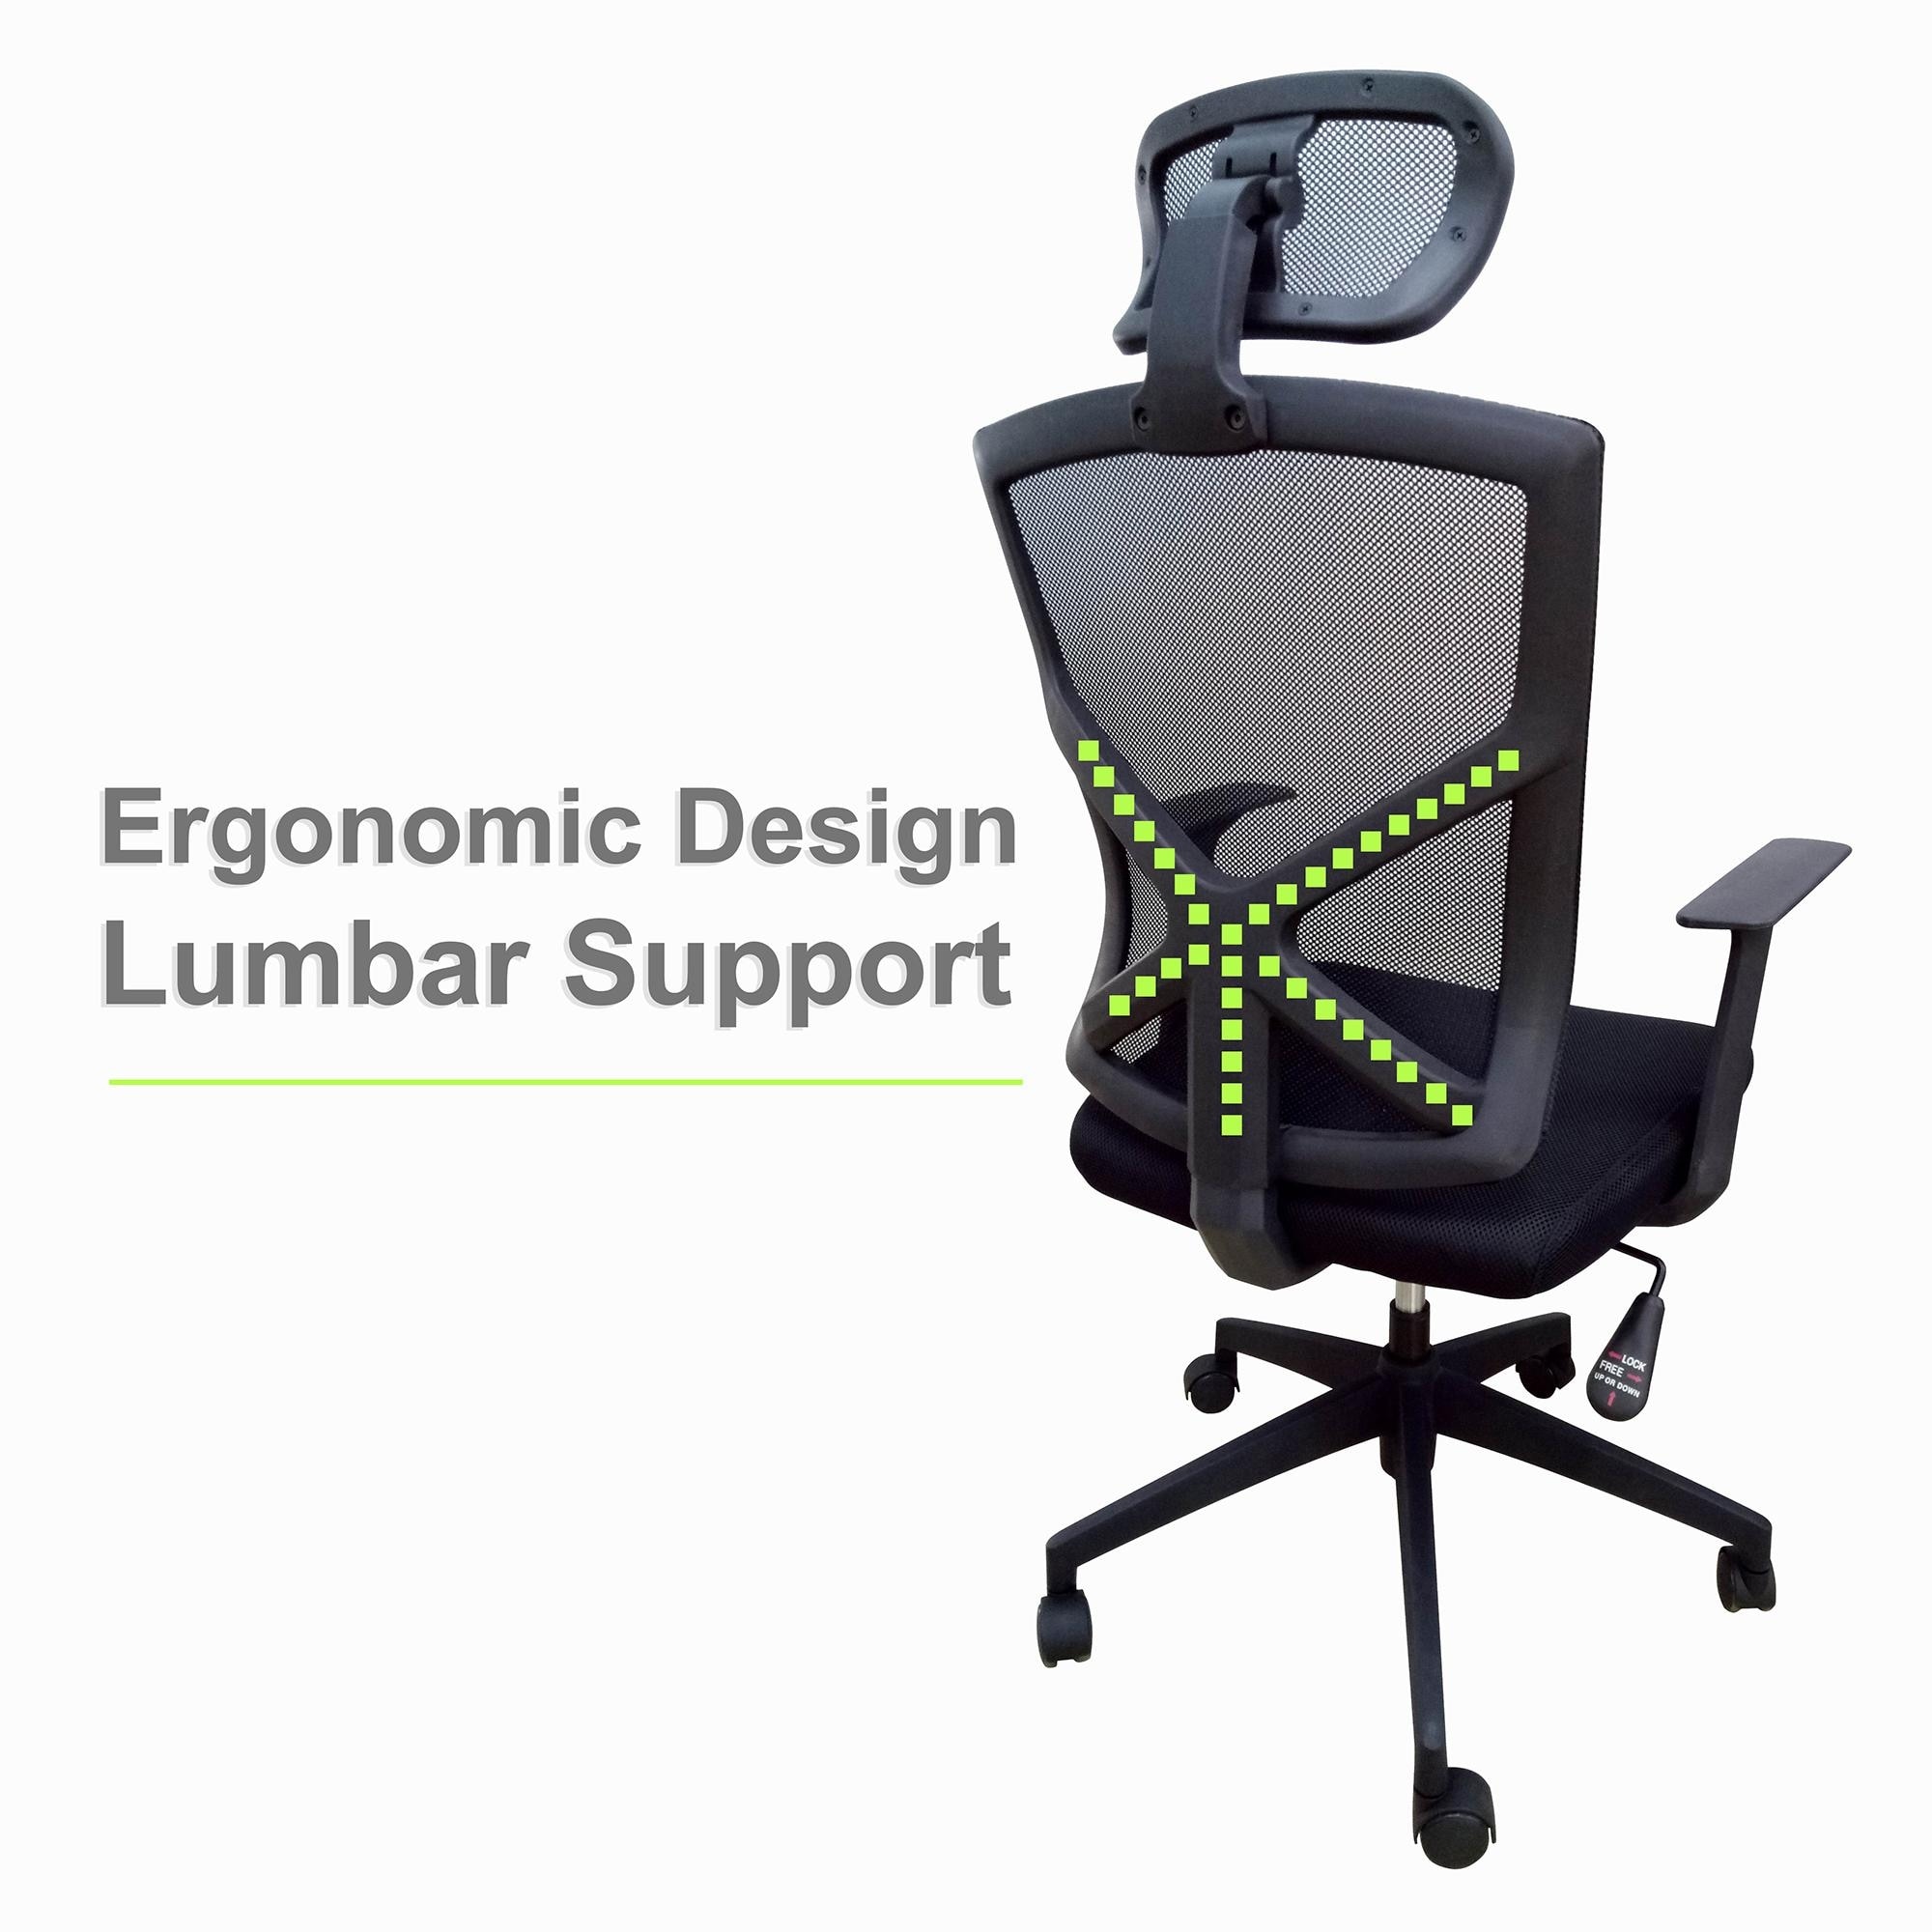 https://ak1.ostkcdn.com/images/products/is/images/direct/8b156e444ed083a4b26f0bdc389938bd9bcc5105/Modern-High-Back-With-Headrest-Chair-Office-Mesh-Chair-Tilt-Arms-Lumber-Support-Large-Base-Adjustable-Swivel-Task-Executive.jpg